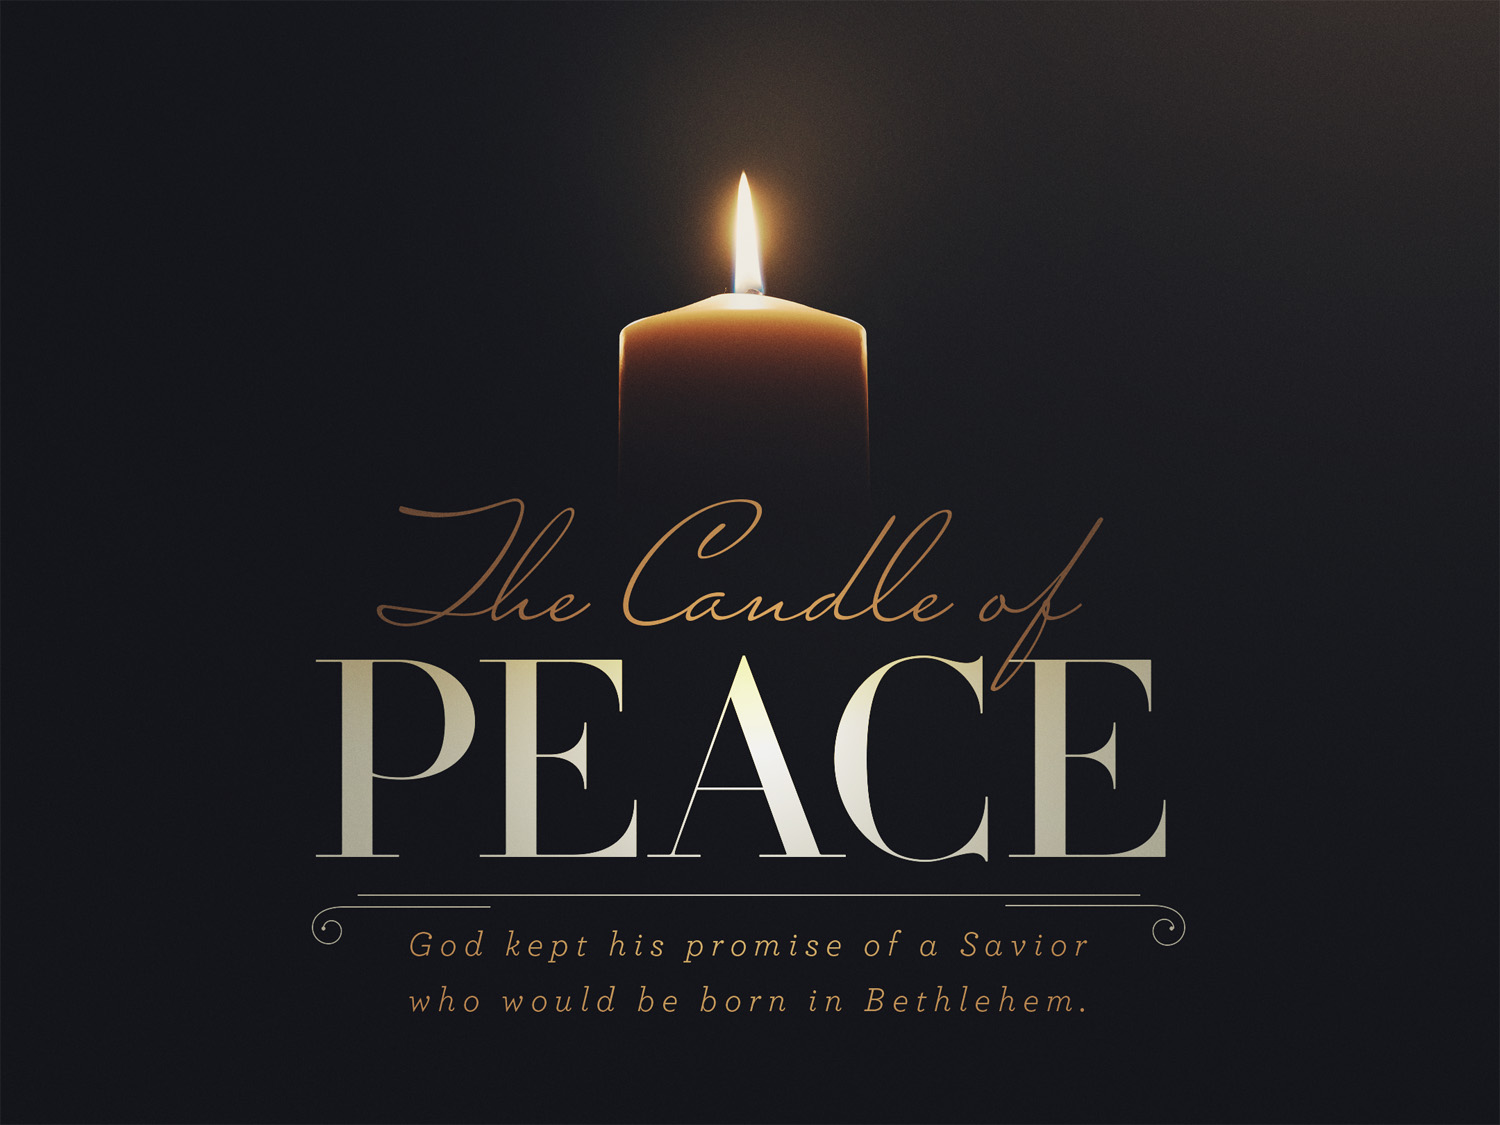 Second Sunday of Advent- Peace